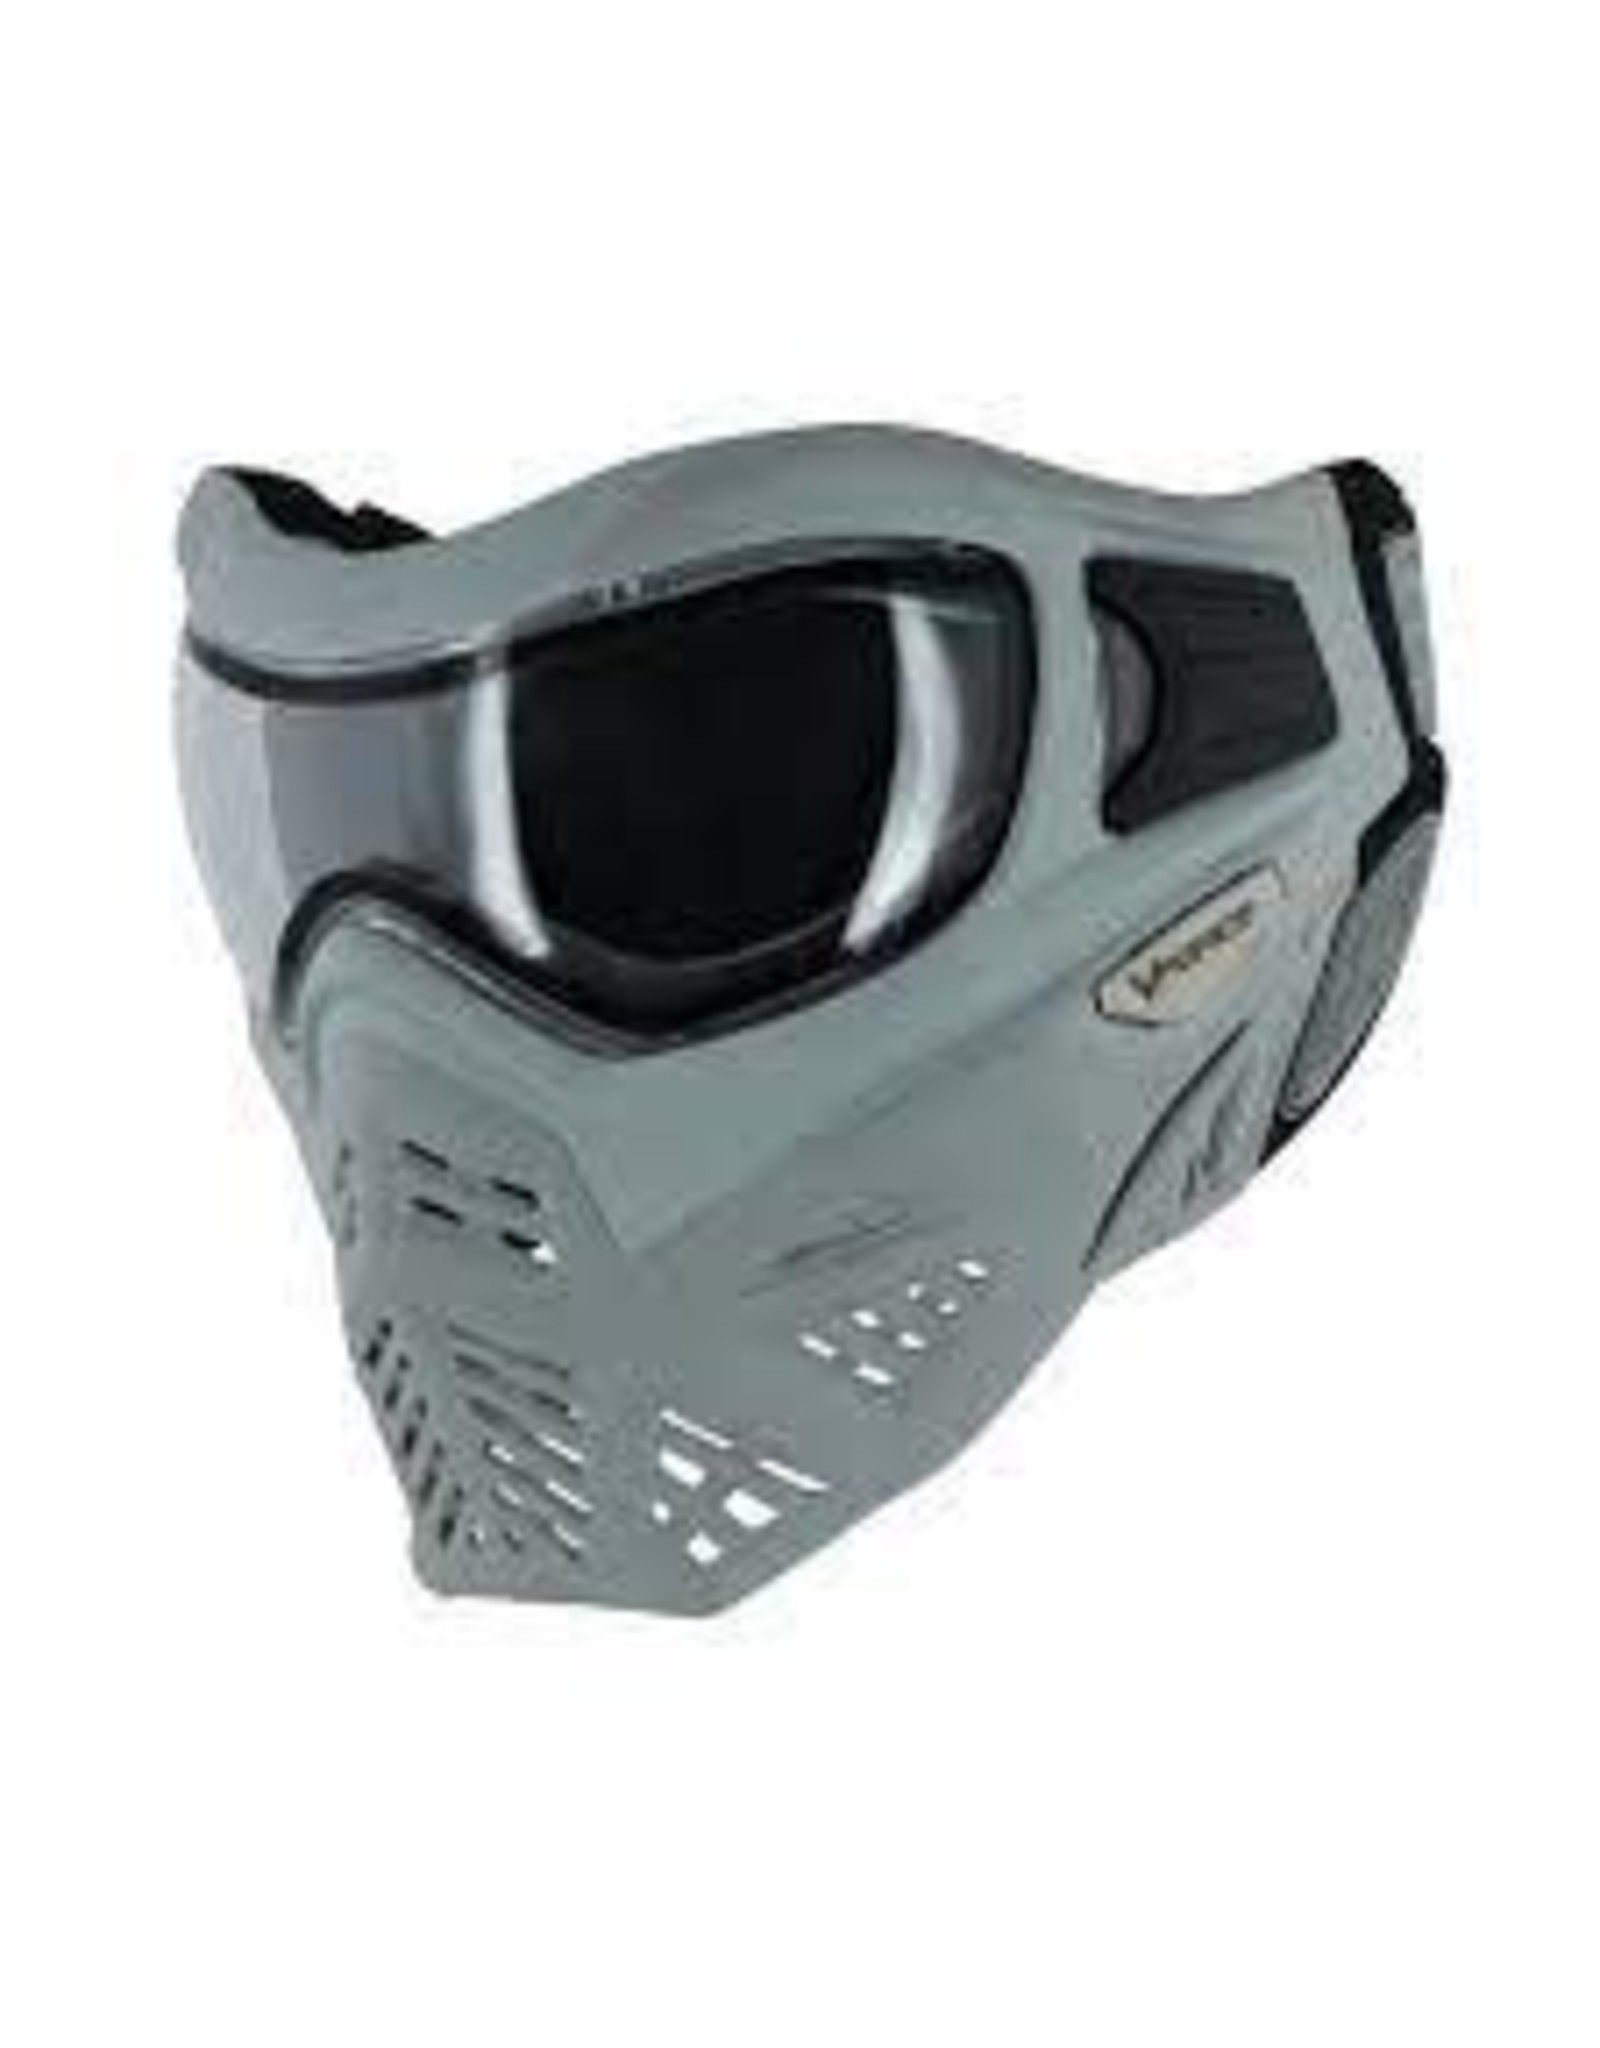 Vforce VForce Grill 2.0 Thermal Mask Clear Lens - Grey/Grey